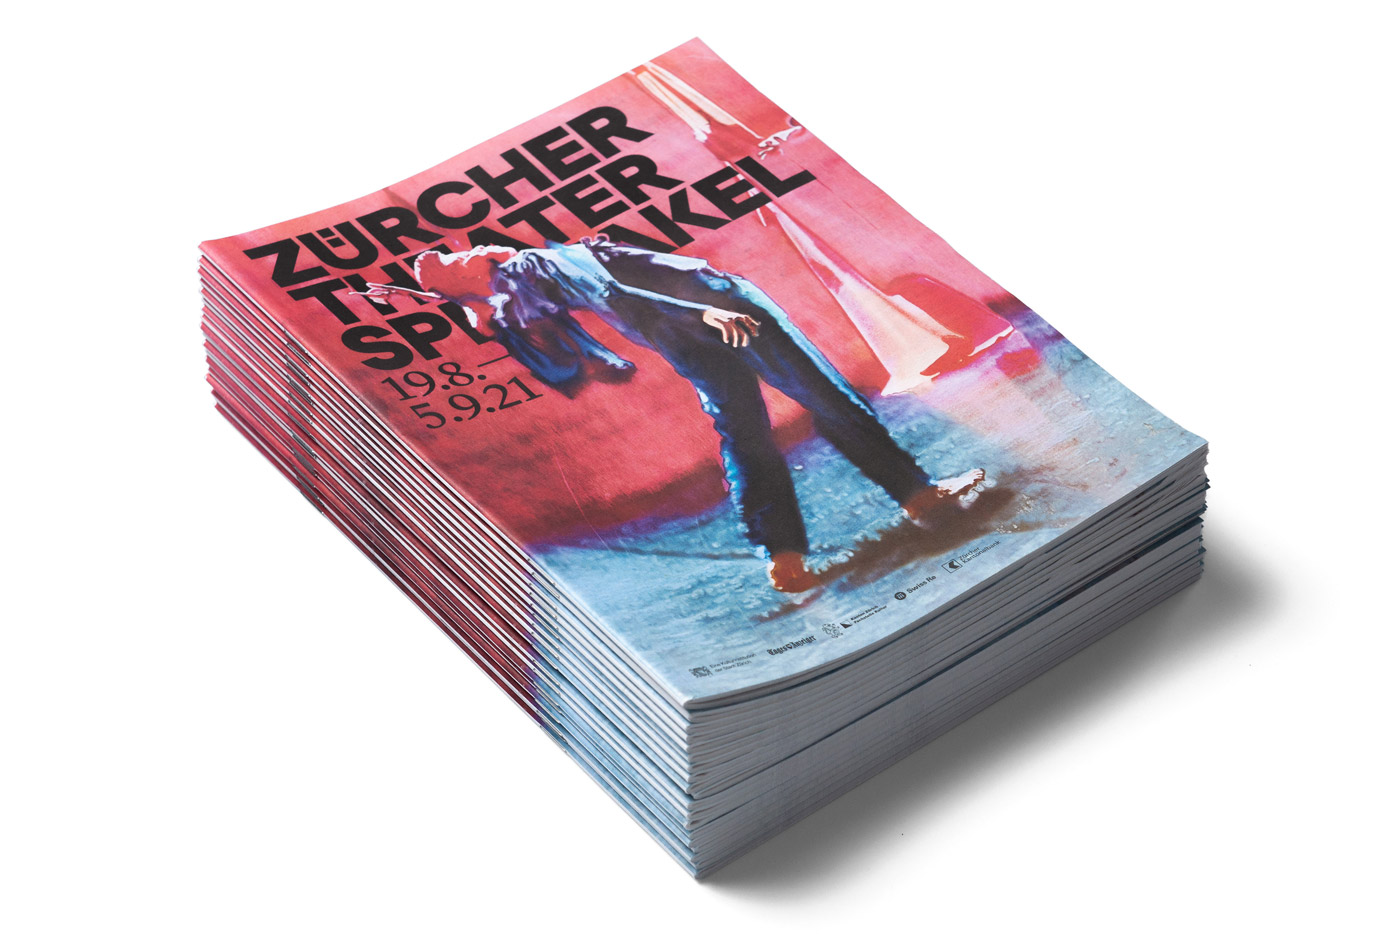 Campaign and Visual Communication by Studio Marcus Kraft for Zürcher Theater Spektakel